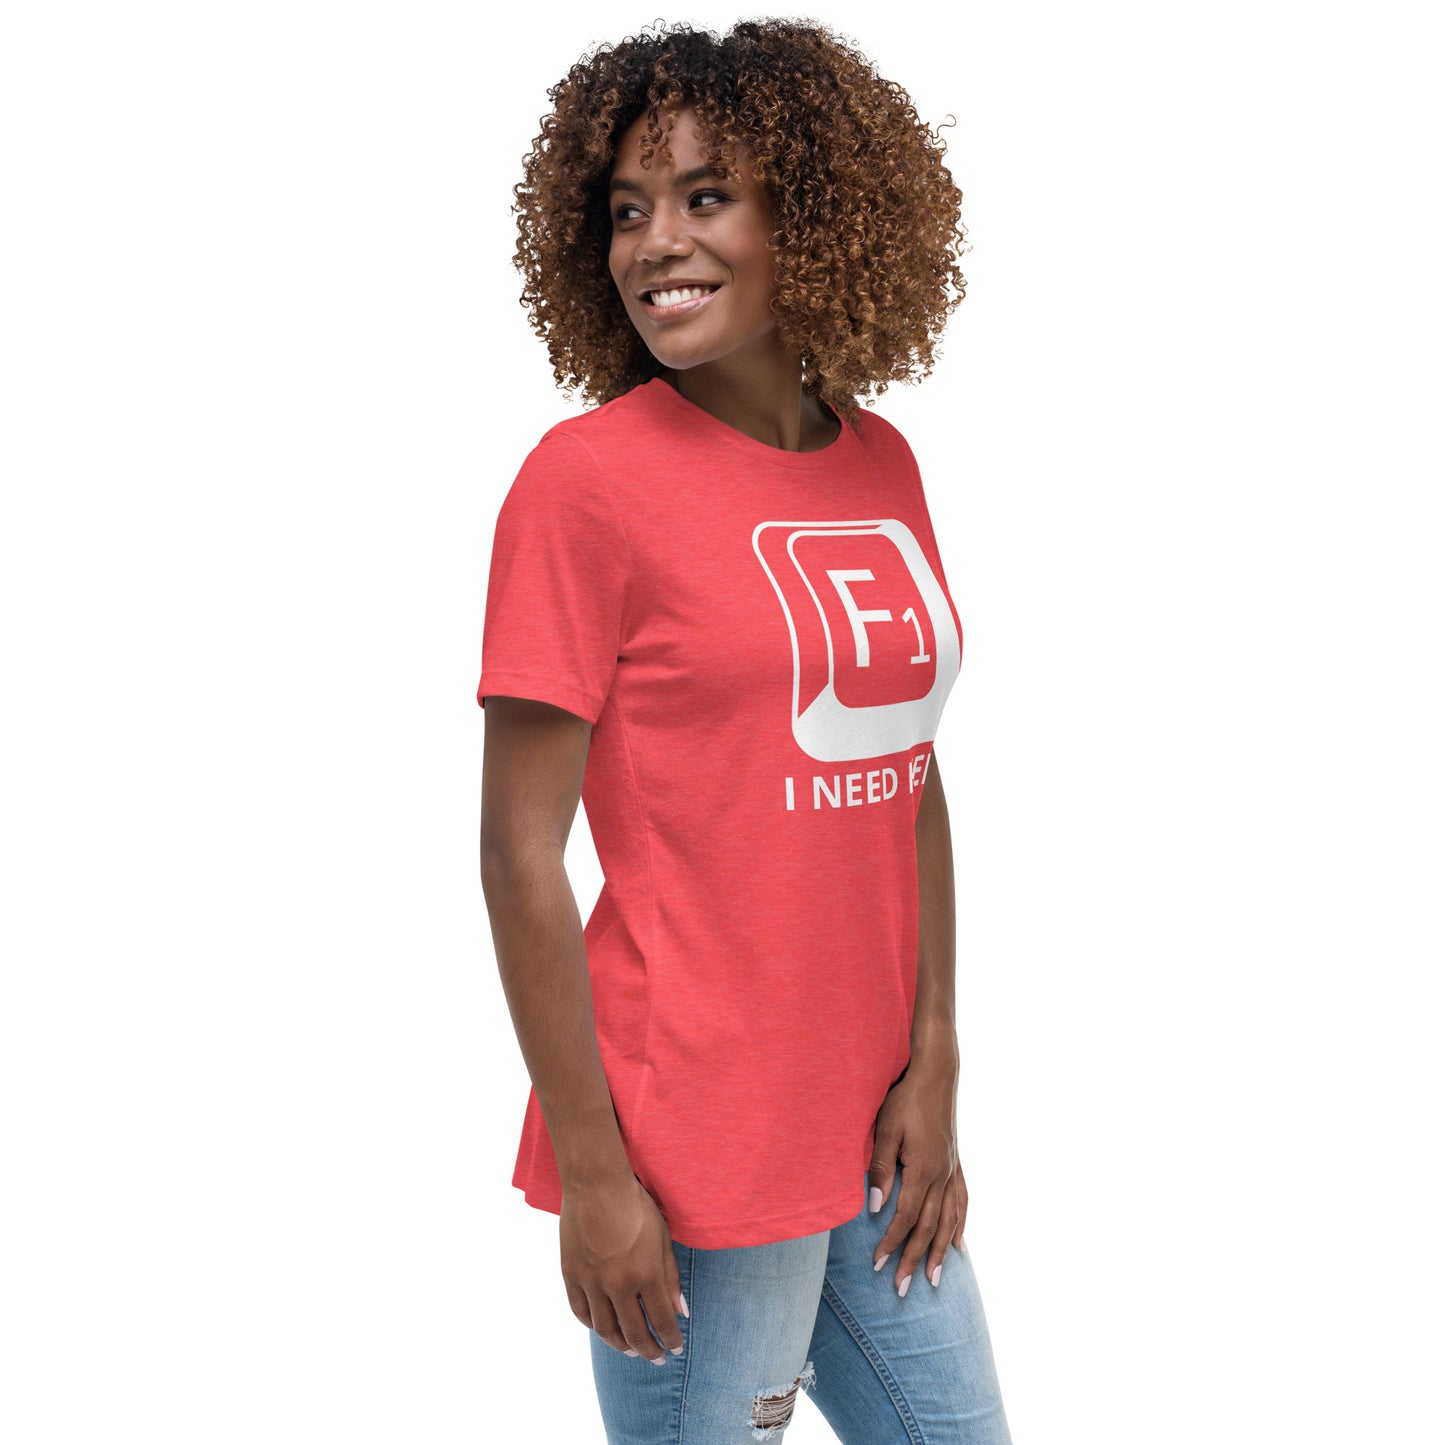 Woman with red t-shirt with picture of "F1" key and text "I need help"